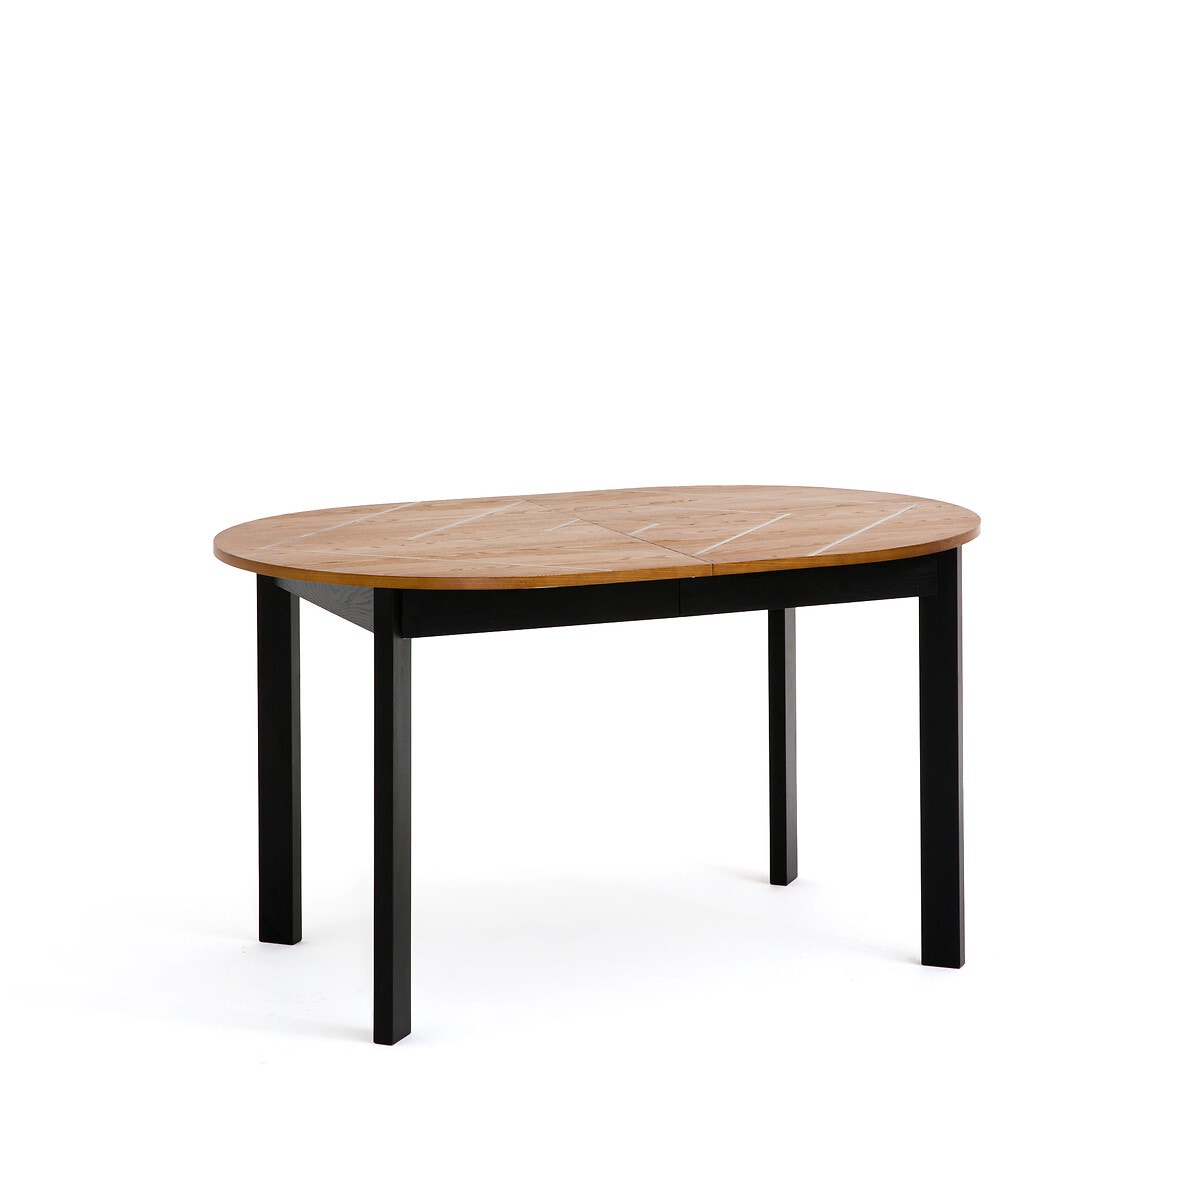 Table Extensible 4 A 6 Personnes